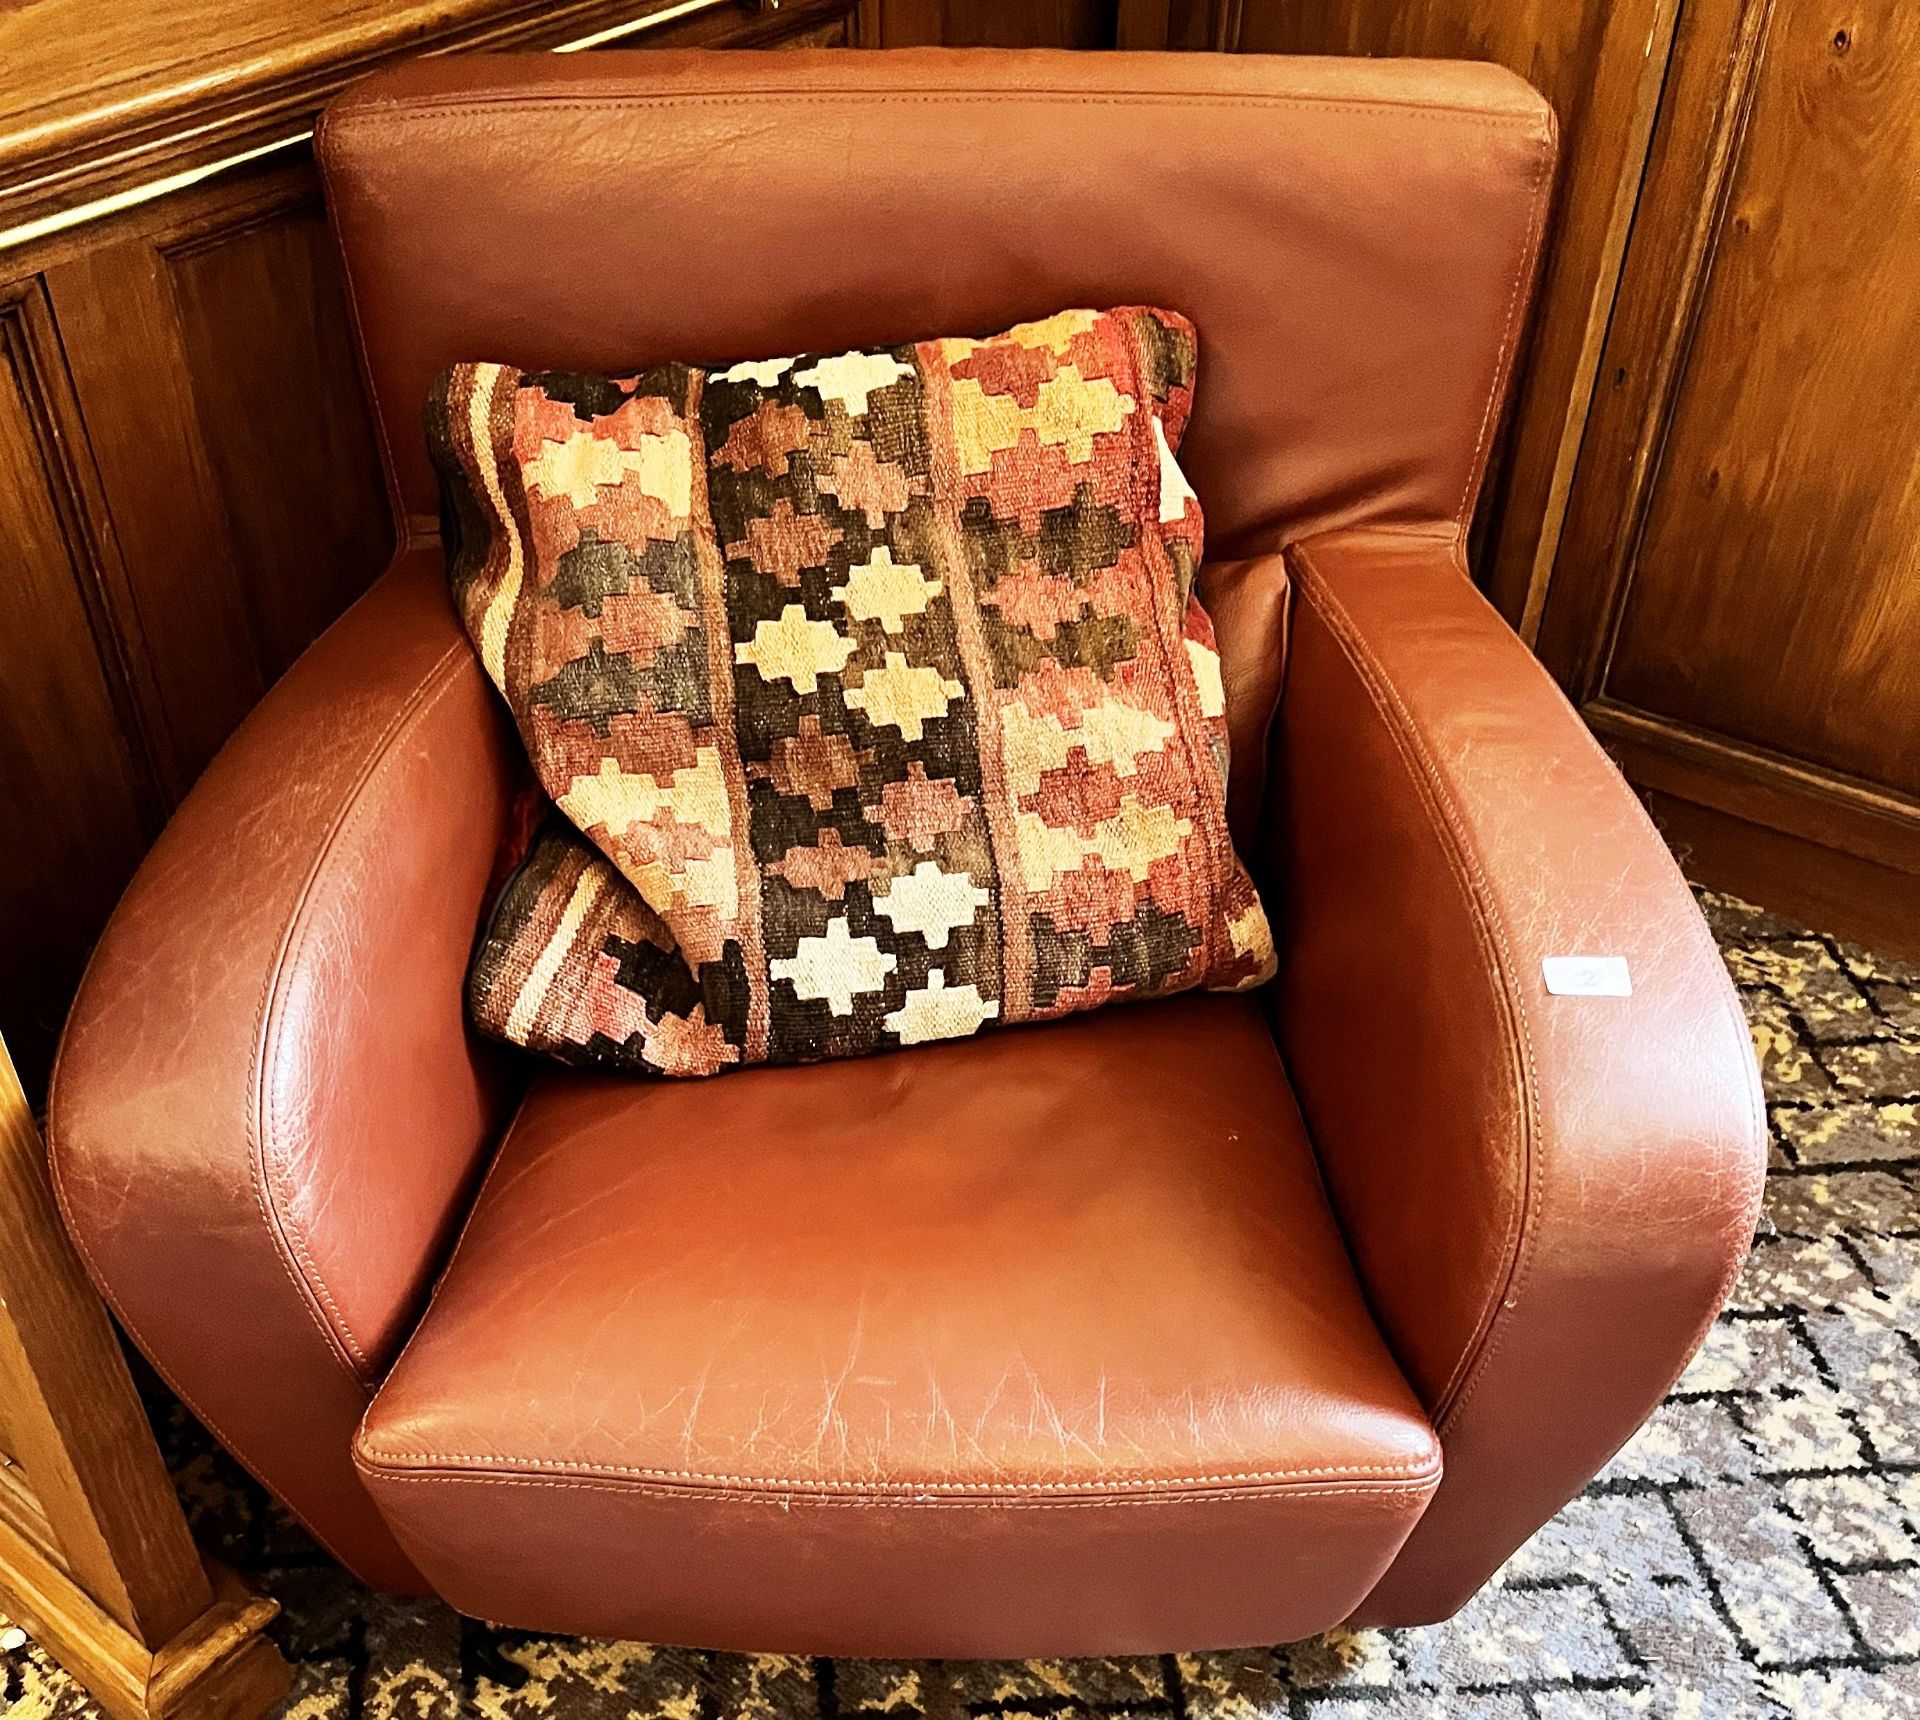 BROWN LEATHER ARMCHAIR AND CUSHION